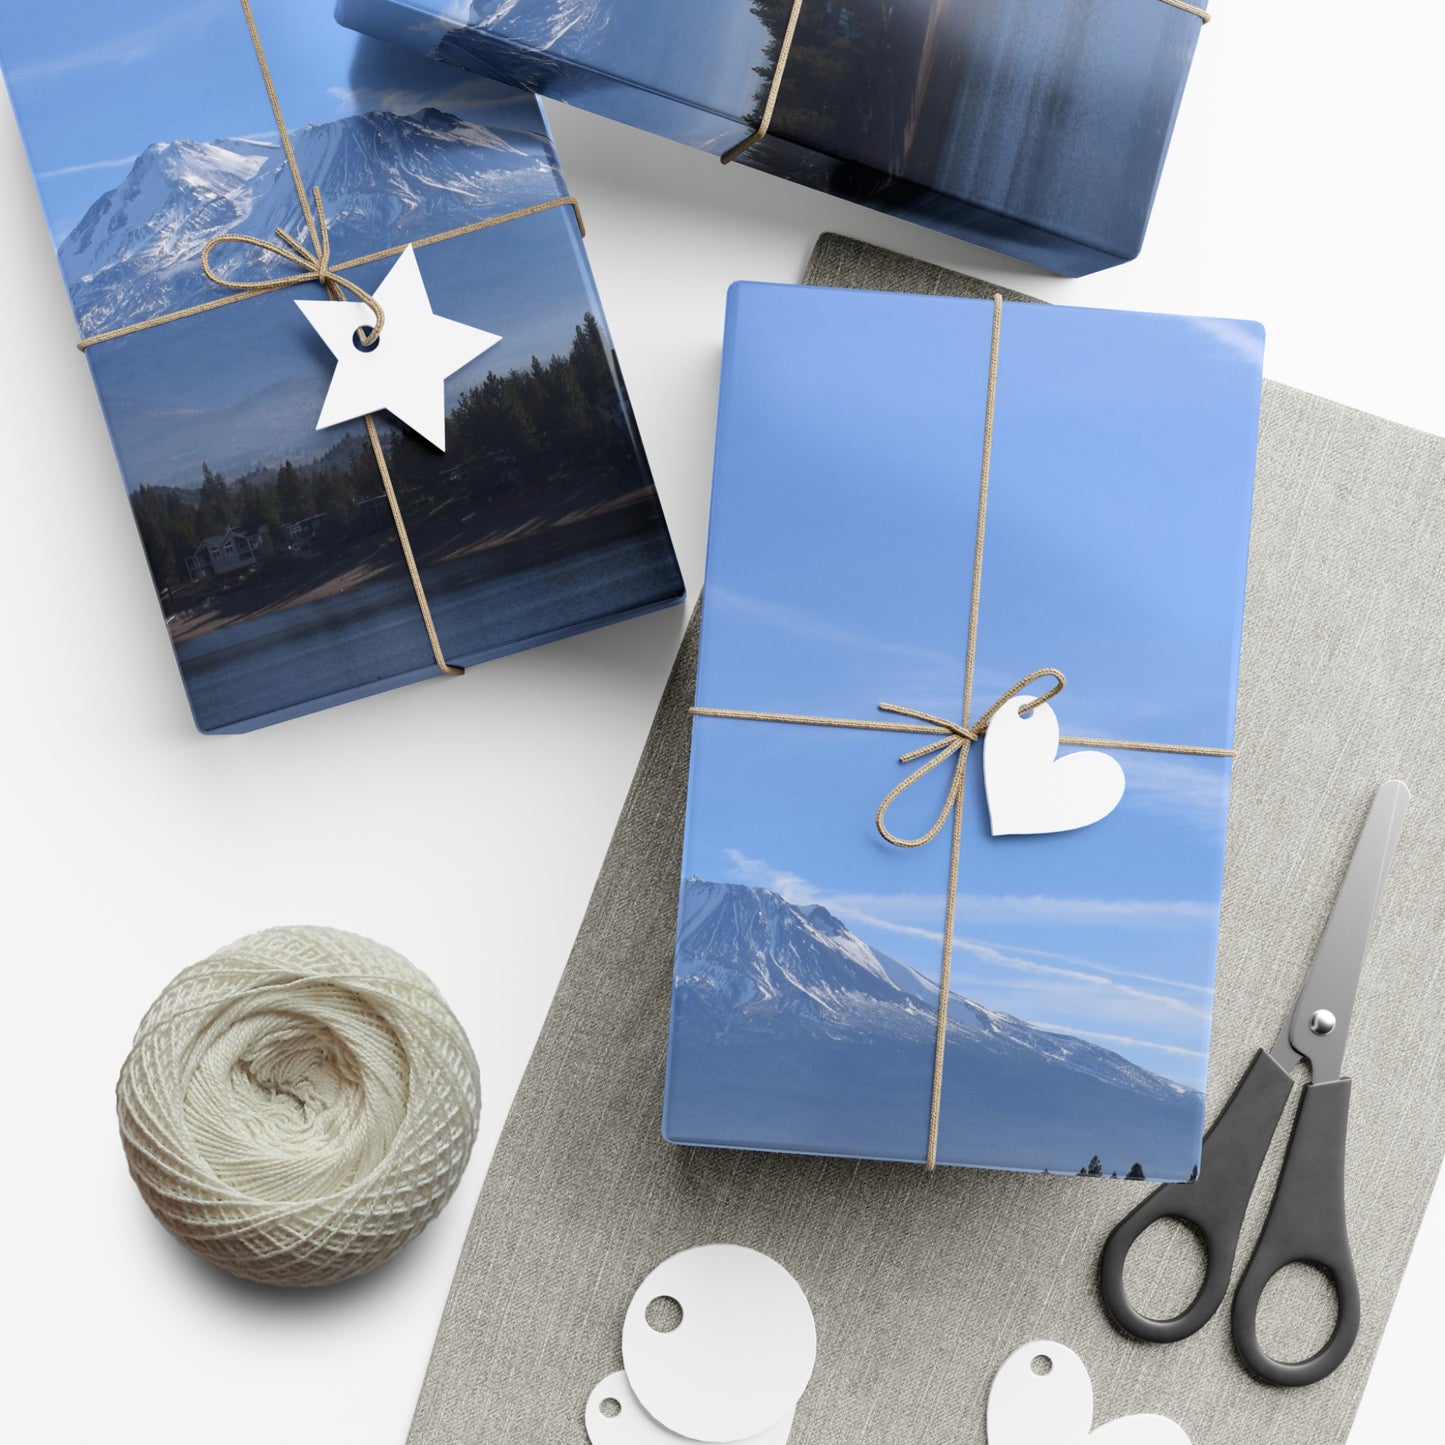 Mount Shasta Streaks in the Sky Gift Wrap Papers